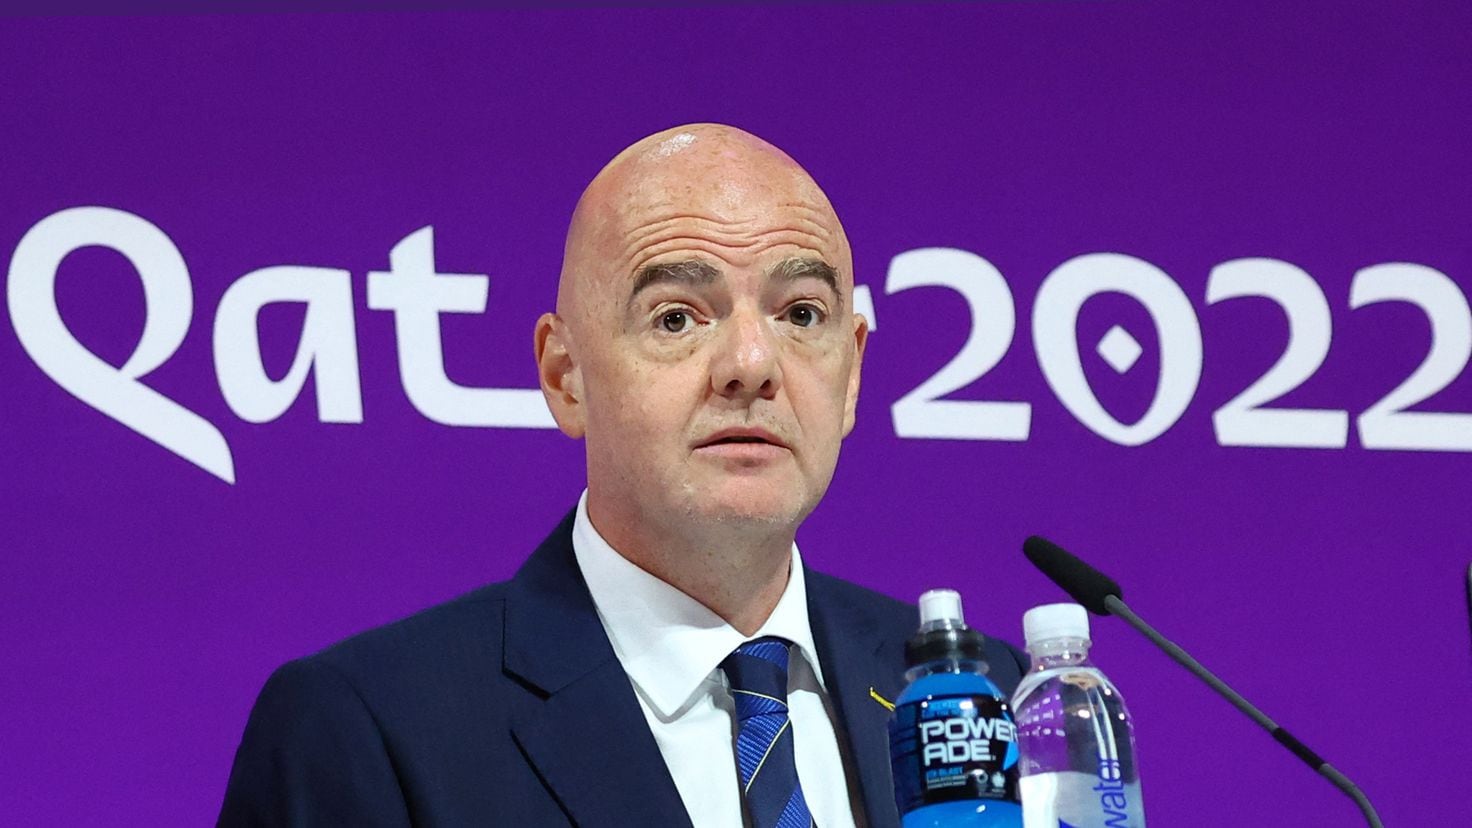 New documents revealed about Qatar’s bribes to FIFA in order to host the 2022 World Cup